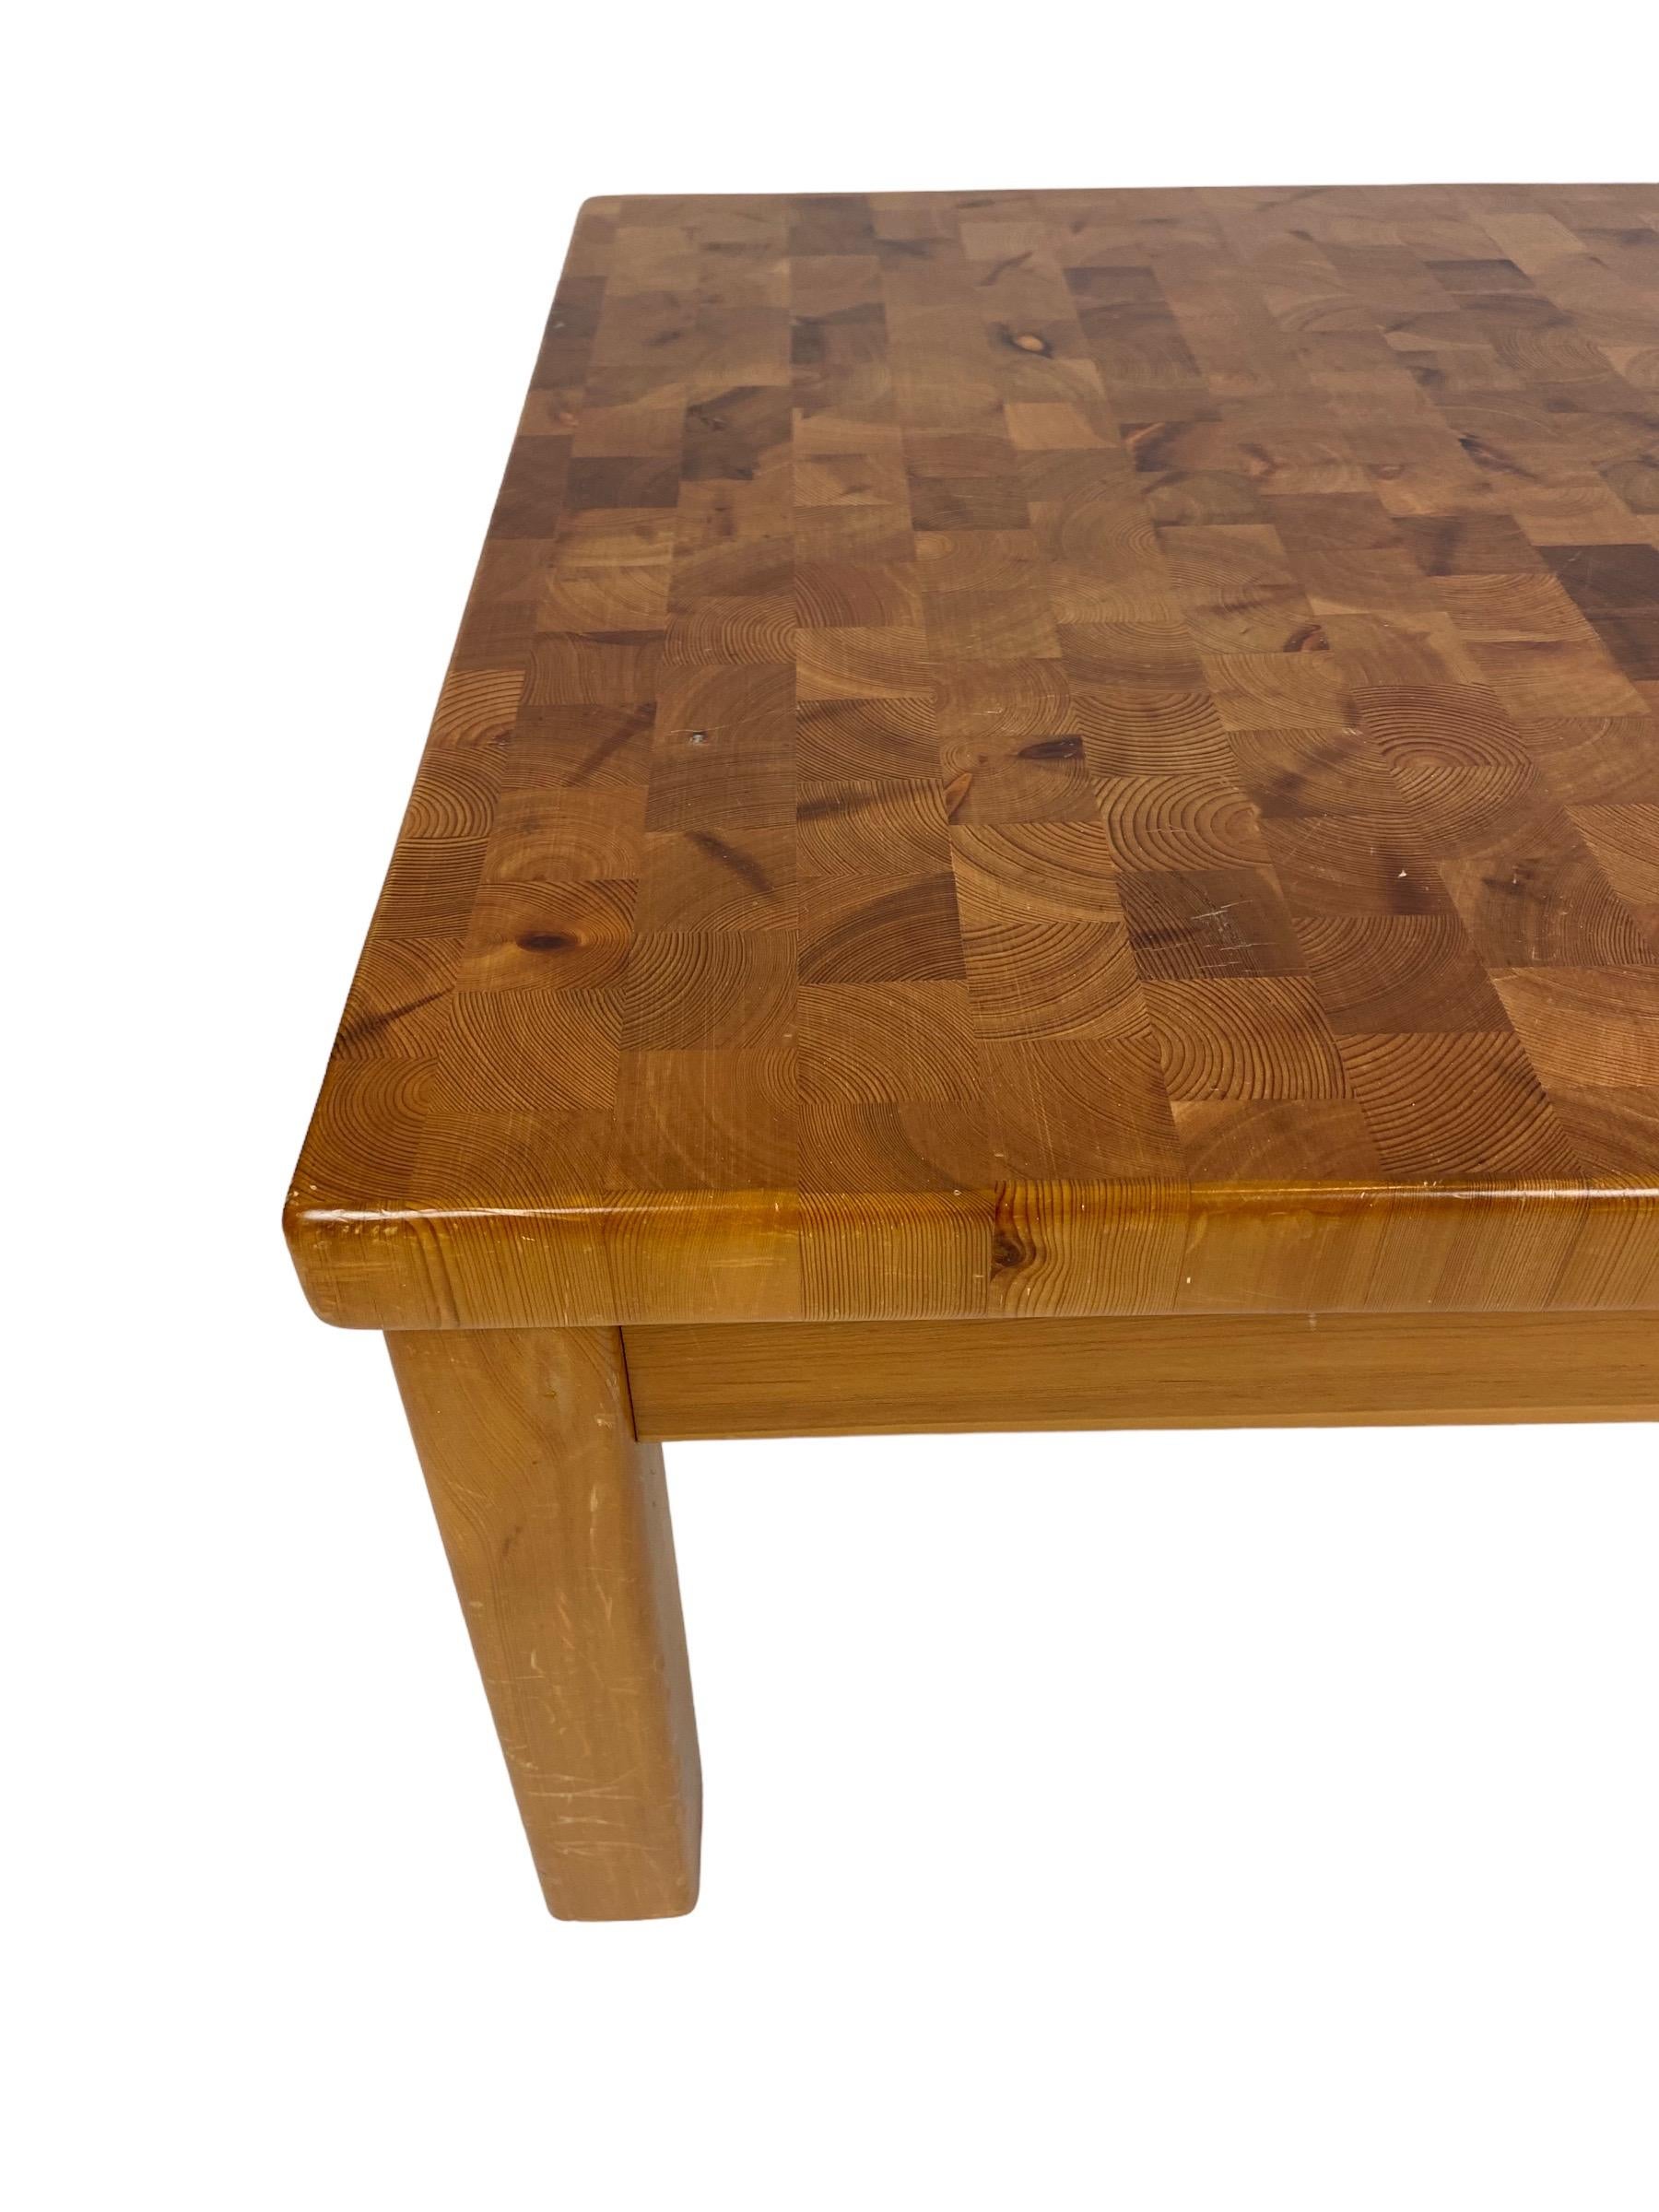 End Grain Side Table made of Pinewood. Midcentury design from The Netherlands.

height 38 cm width 69 cm depth 69 cm.